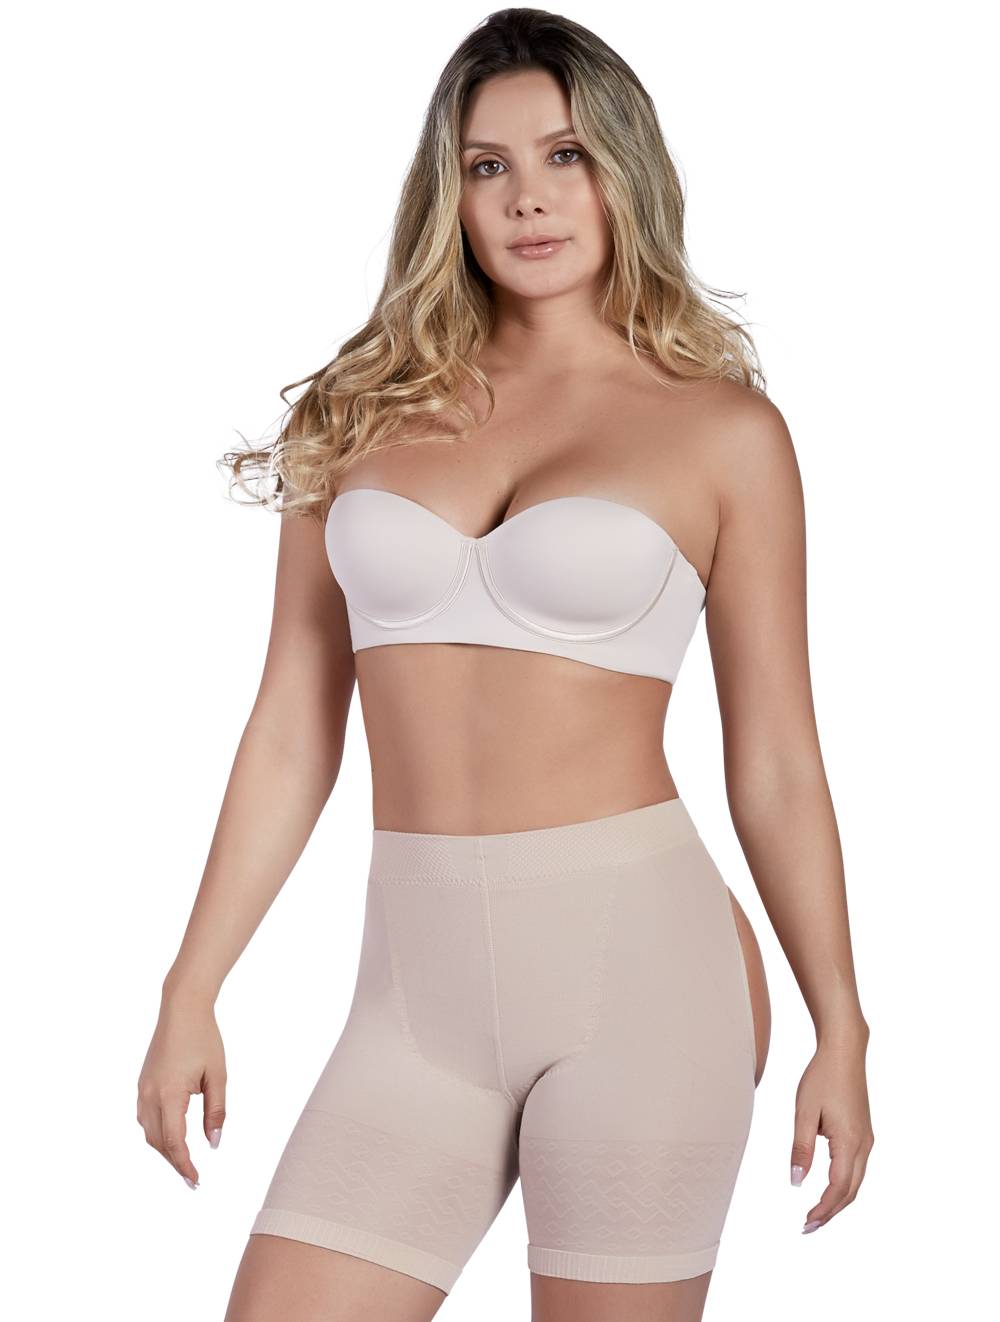 Find Cheap, Fashionable and Slimming ladies butt lift body shaper